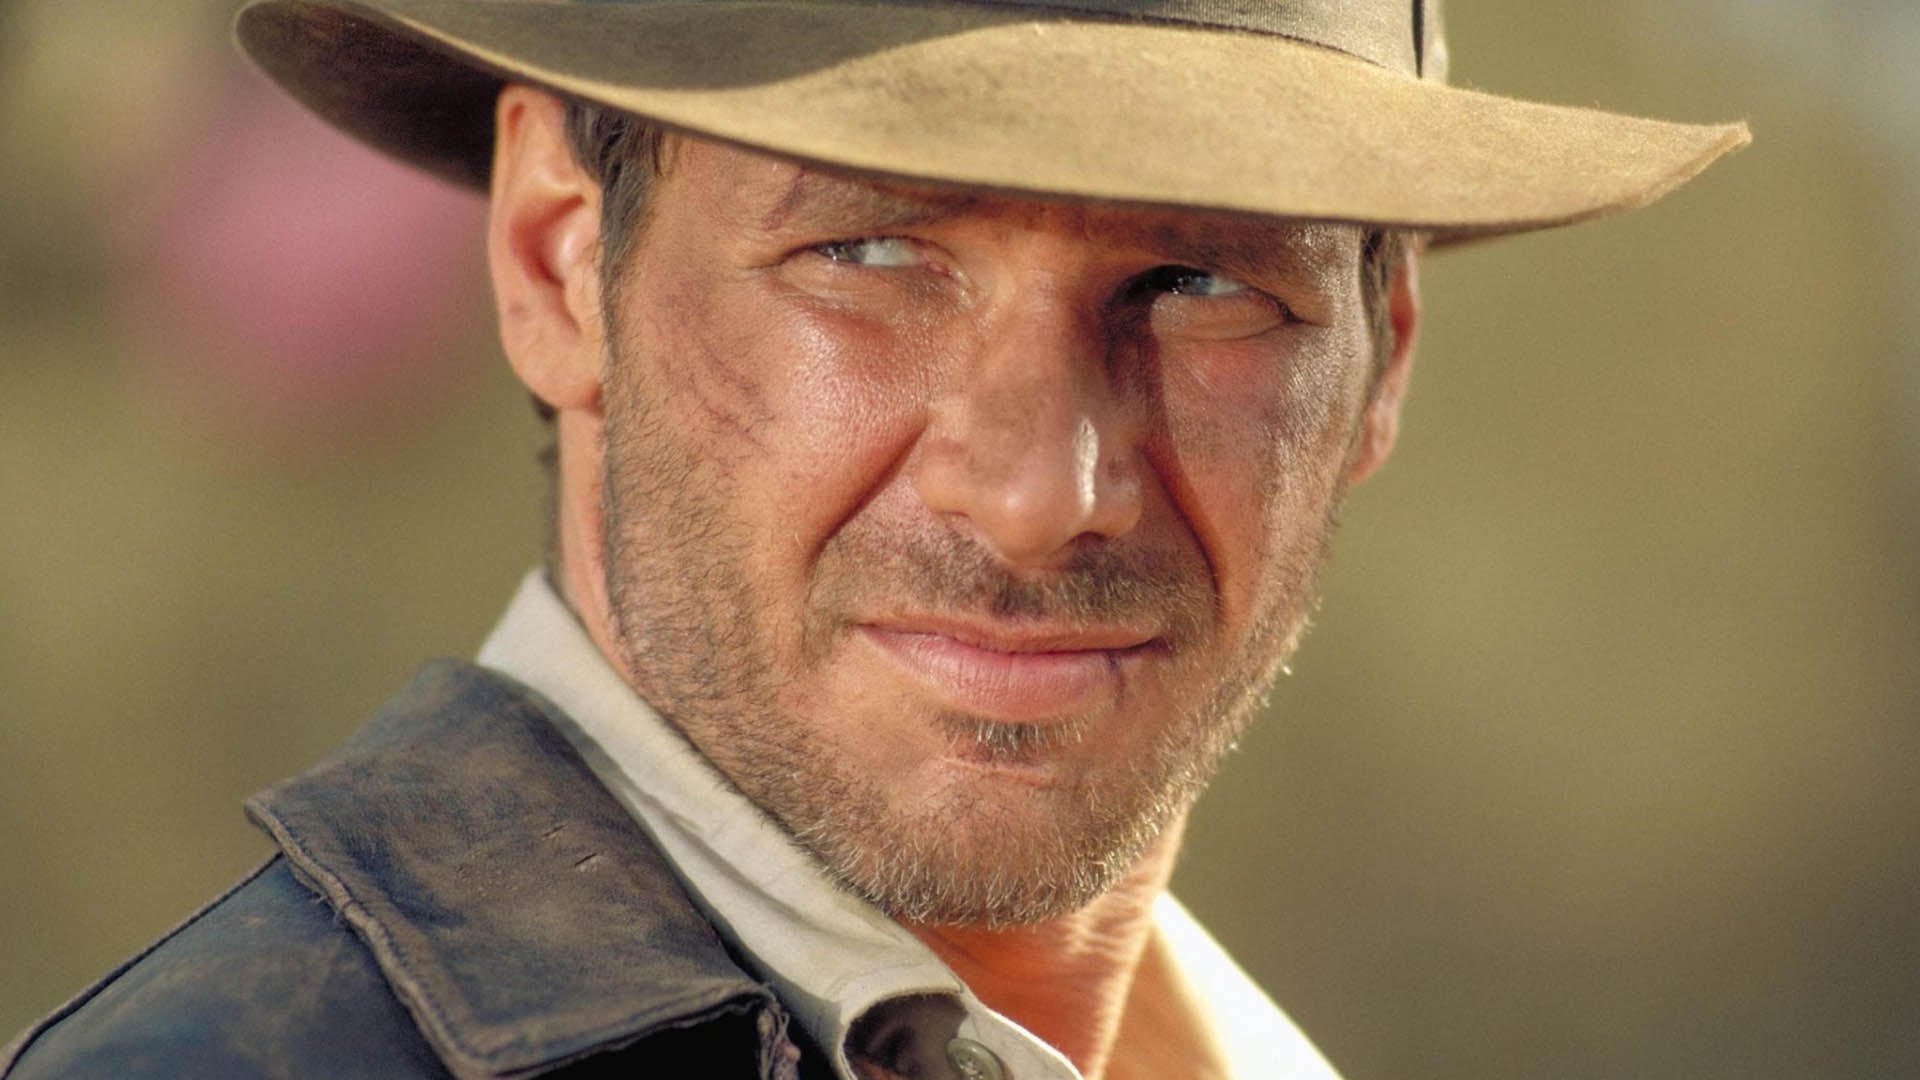 Harrison Ford is starring in the Indiana Jones series